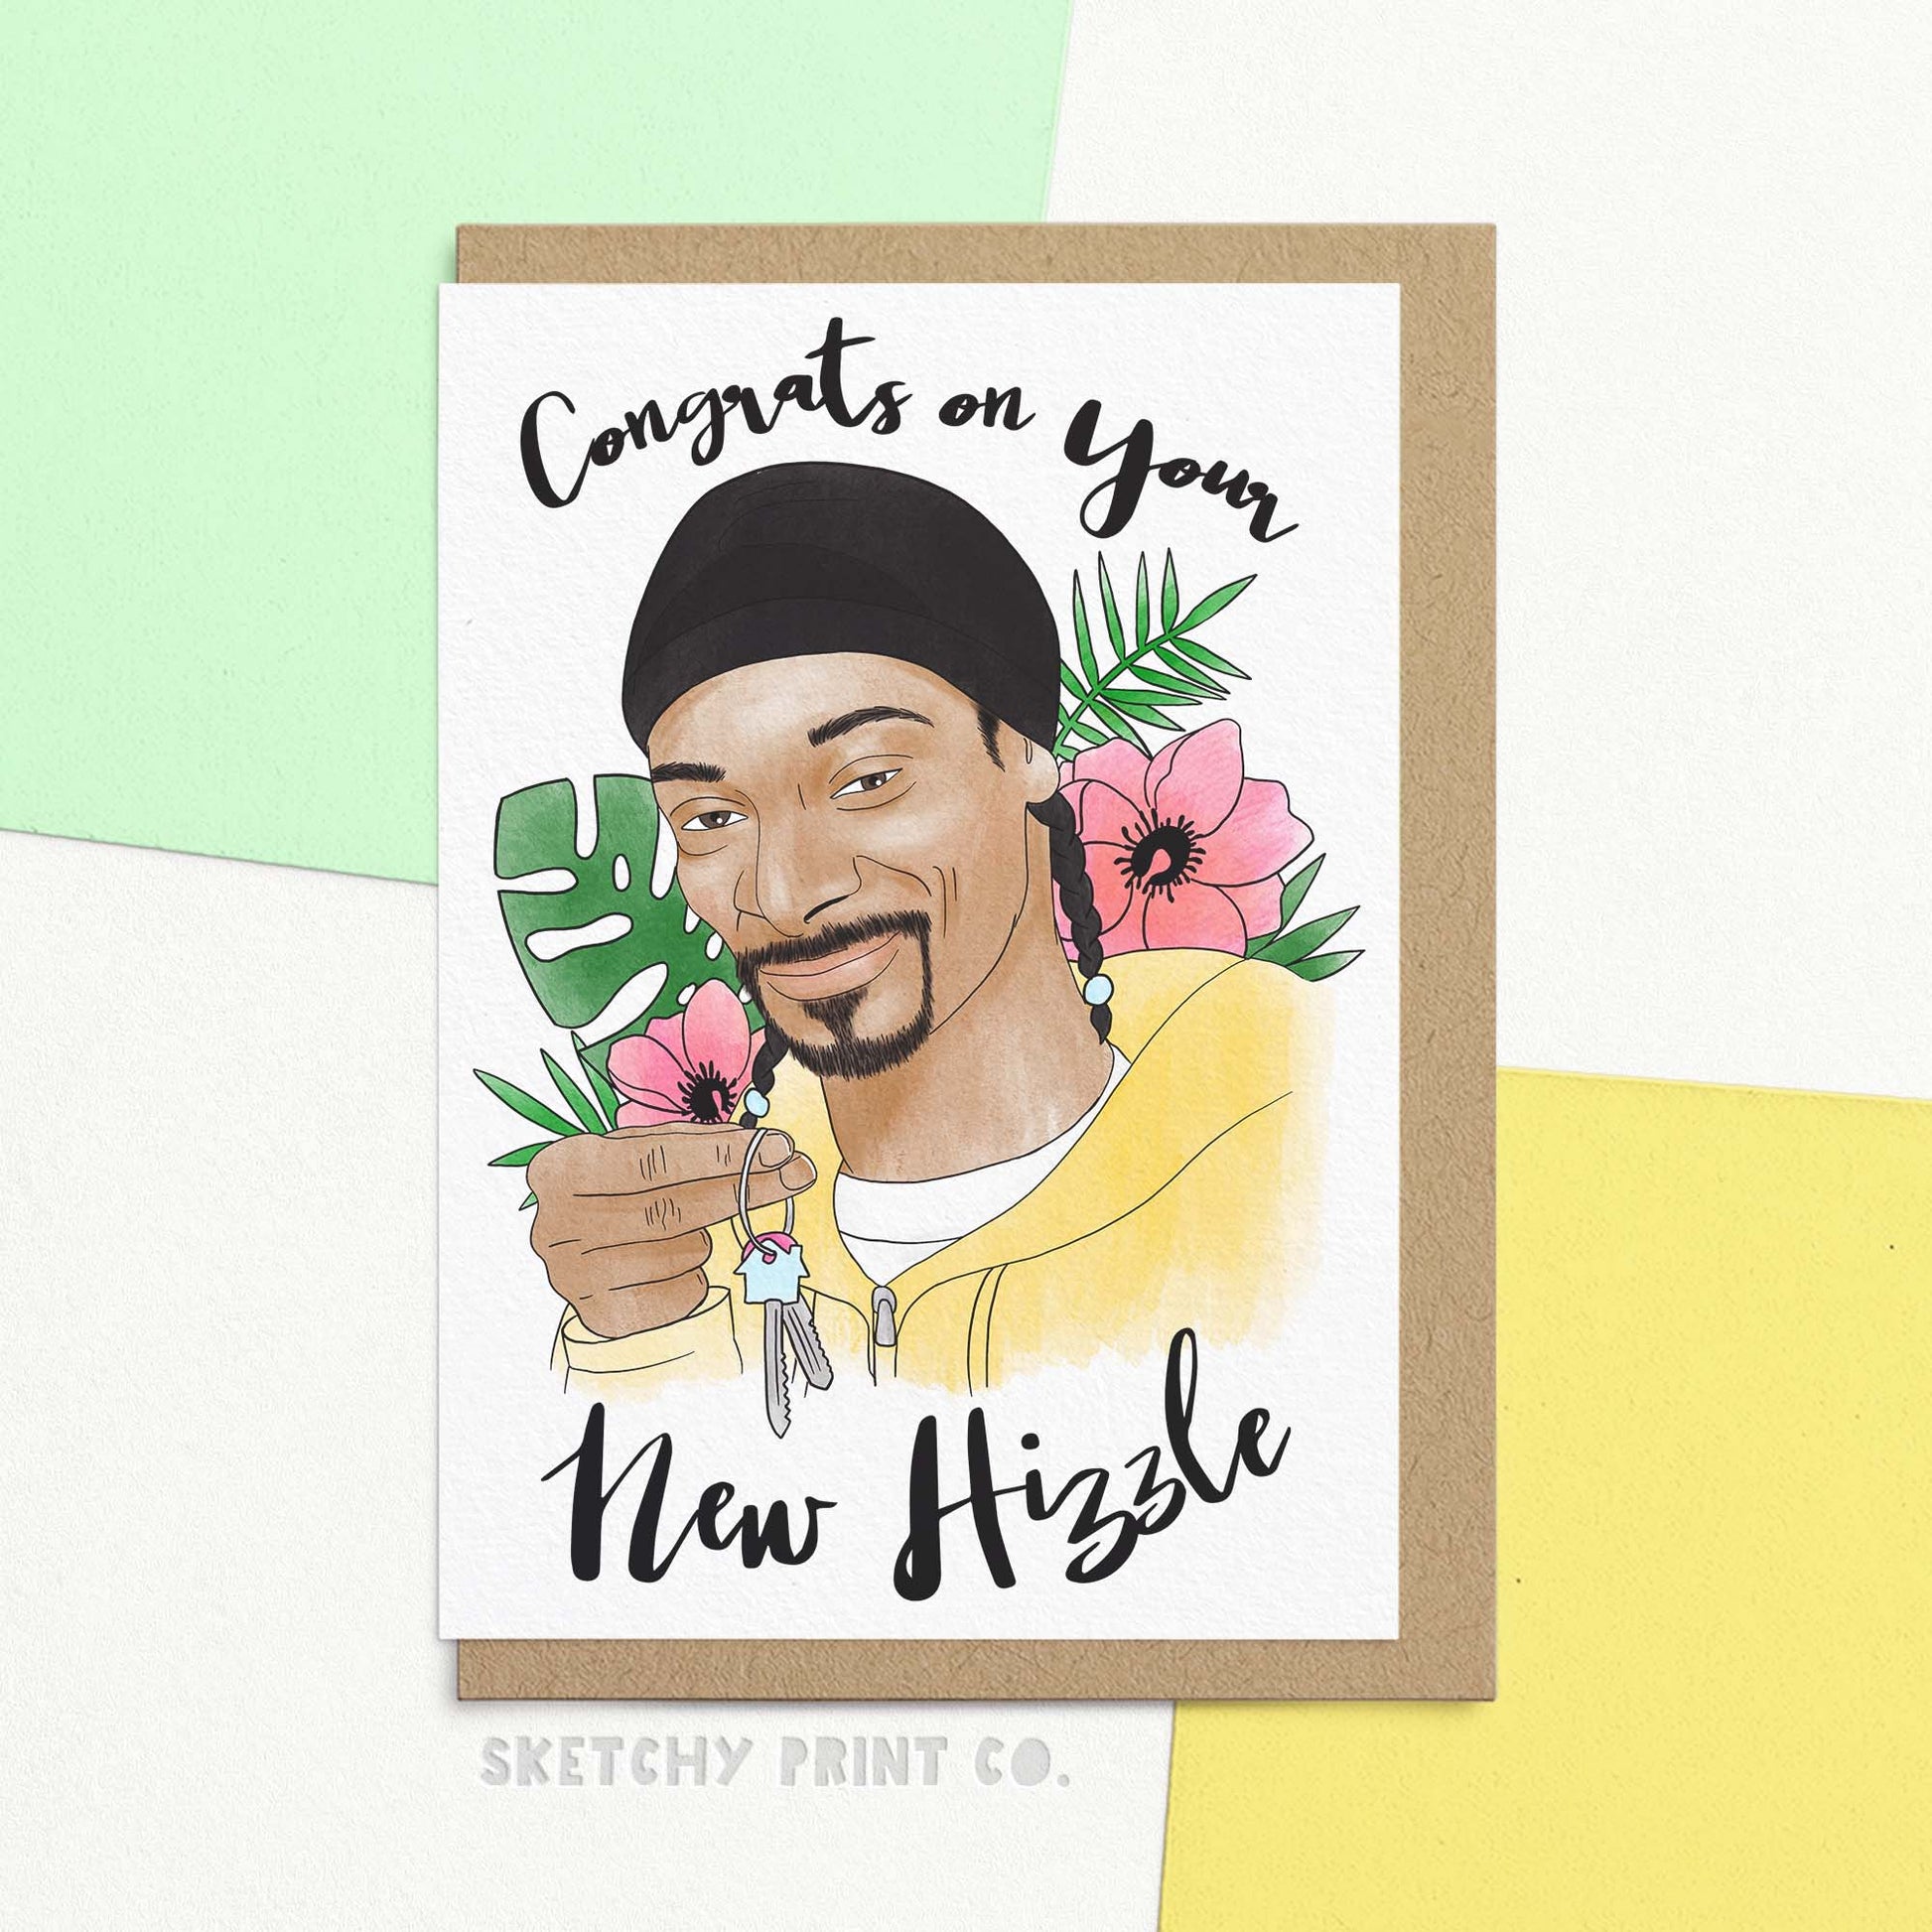 Funny New Home Card reading Congrats on your new hizzle. Featuring an artist interpretation of a rapper holding house keys surrounded by plants. Welcome them to their new hizzle with this funny housewarming card! Congratulate them on their new digs and remind them they can play their music as loud as they want now, fo shizzle! Well, until their neighbours complain!